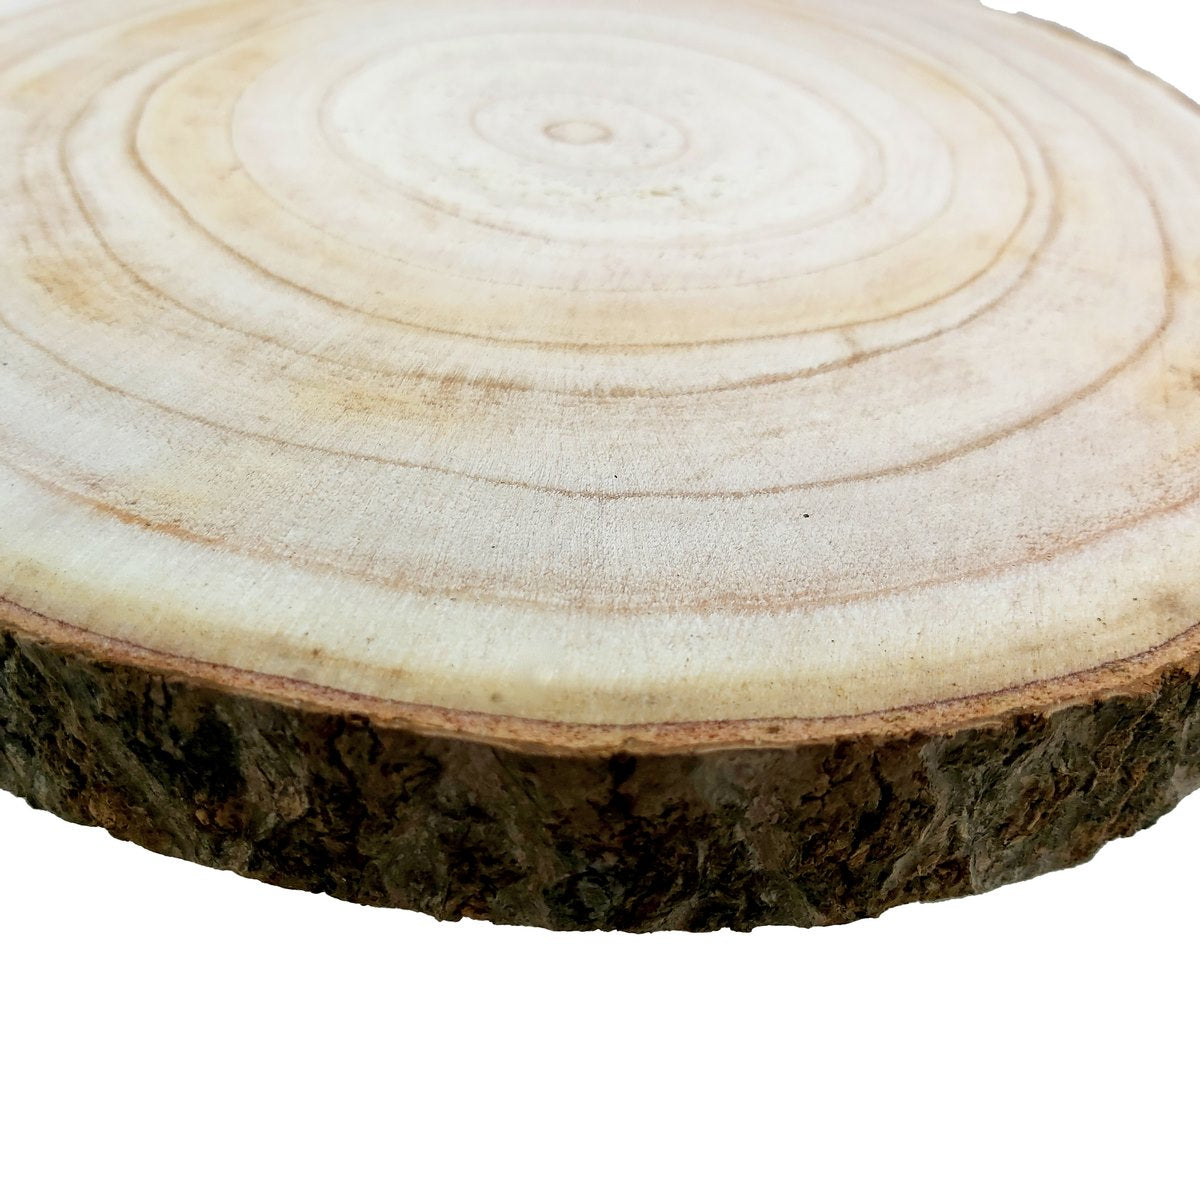 jags-mumbai Wooden Slice and Cut Out Round Wood Plate Light Weight 24CM TO 27CM 2.5CM RWPLW27CM